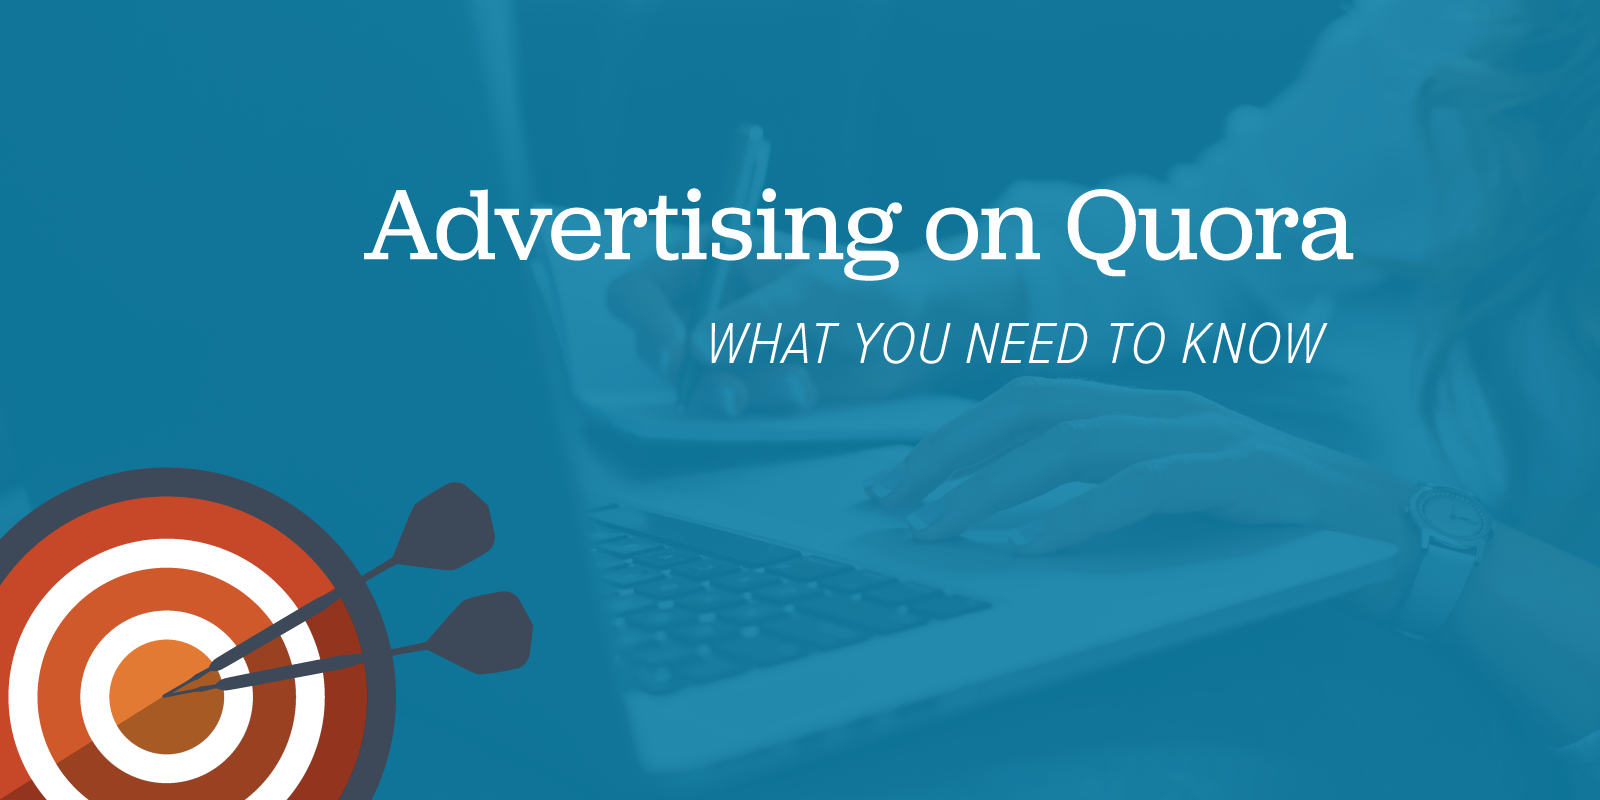 Advertising on Quora — What You Need to Know